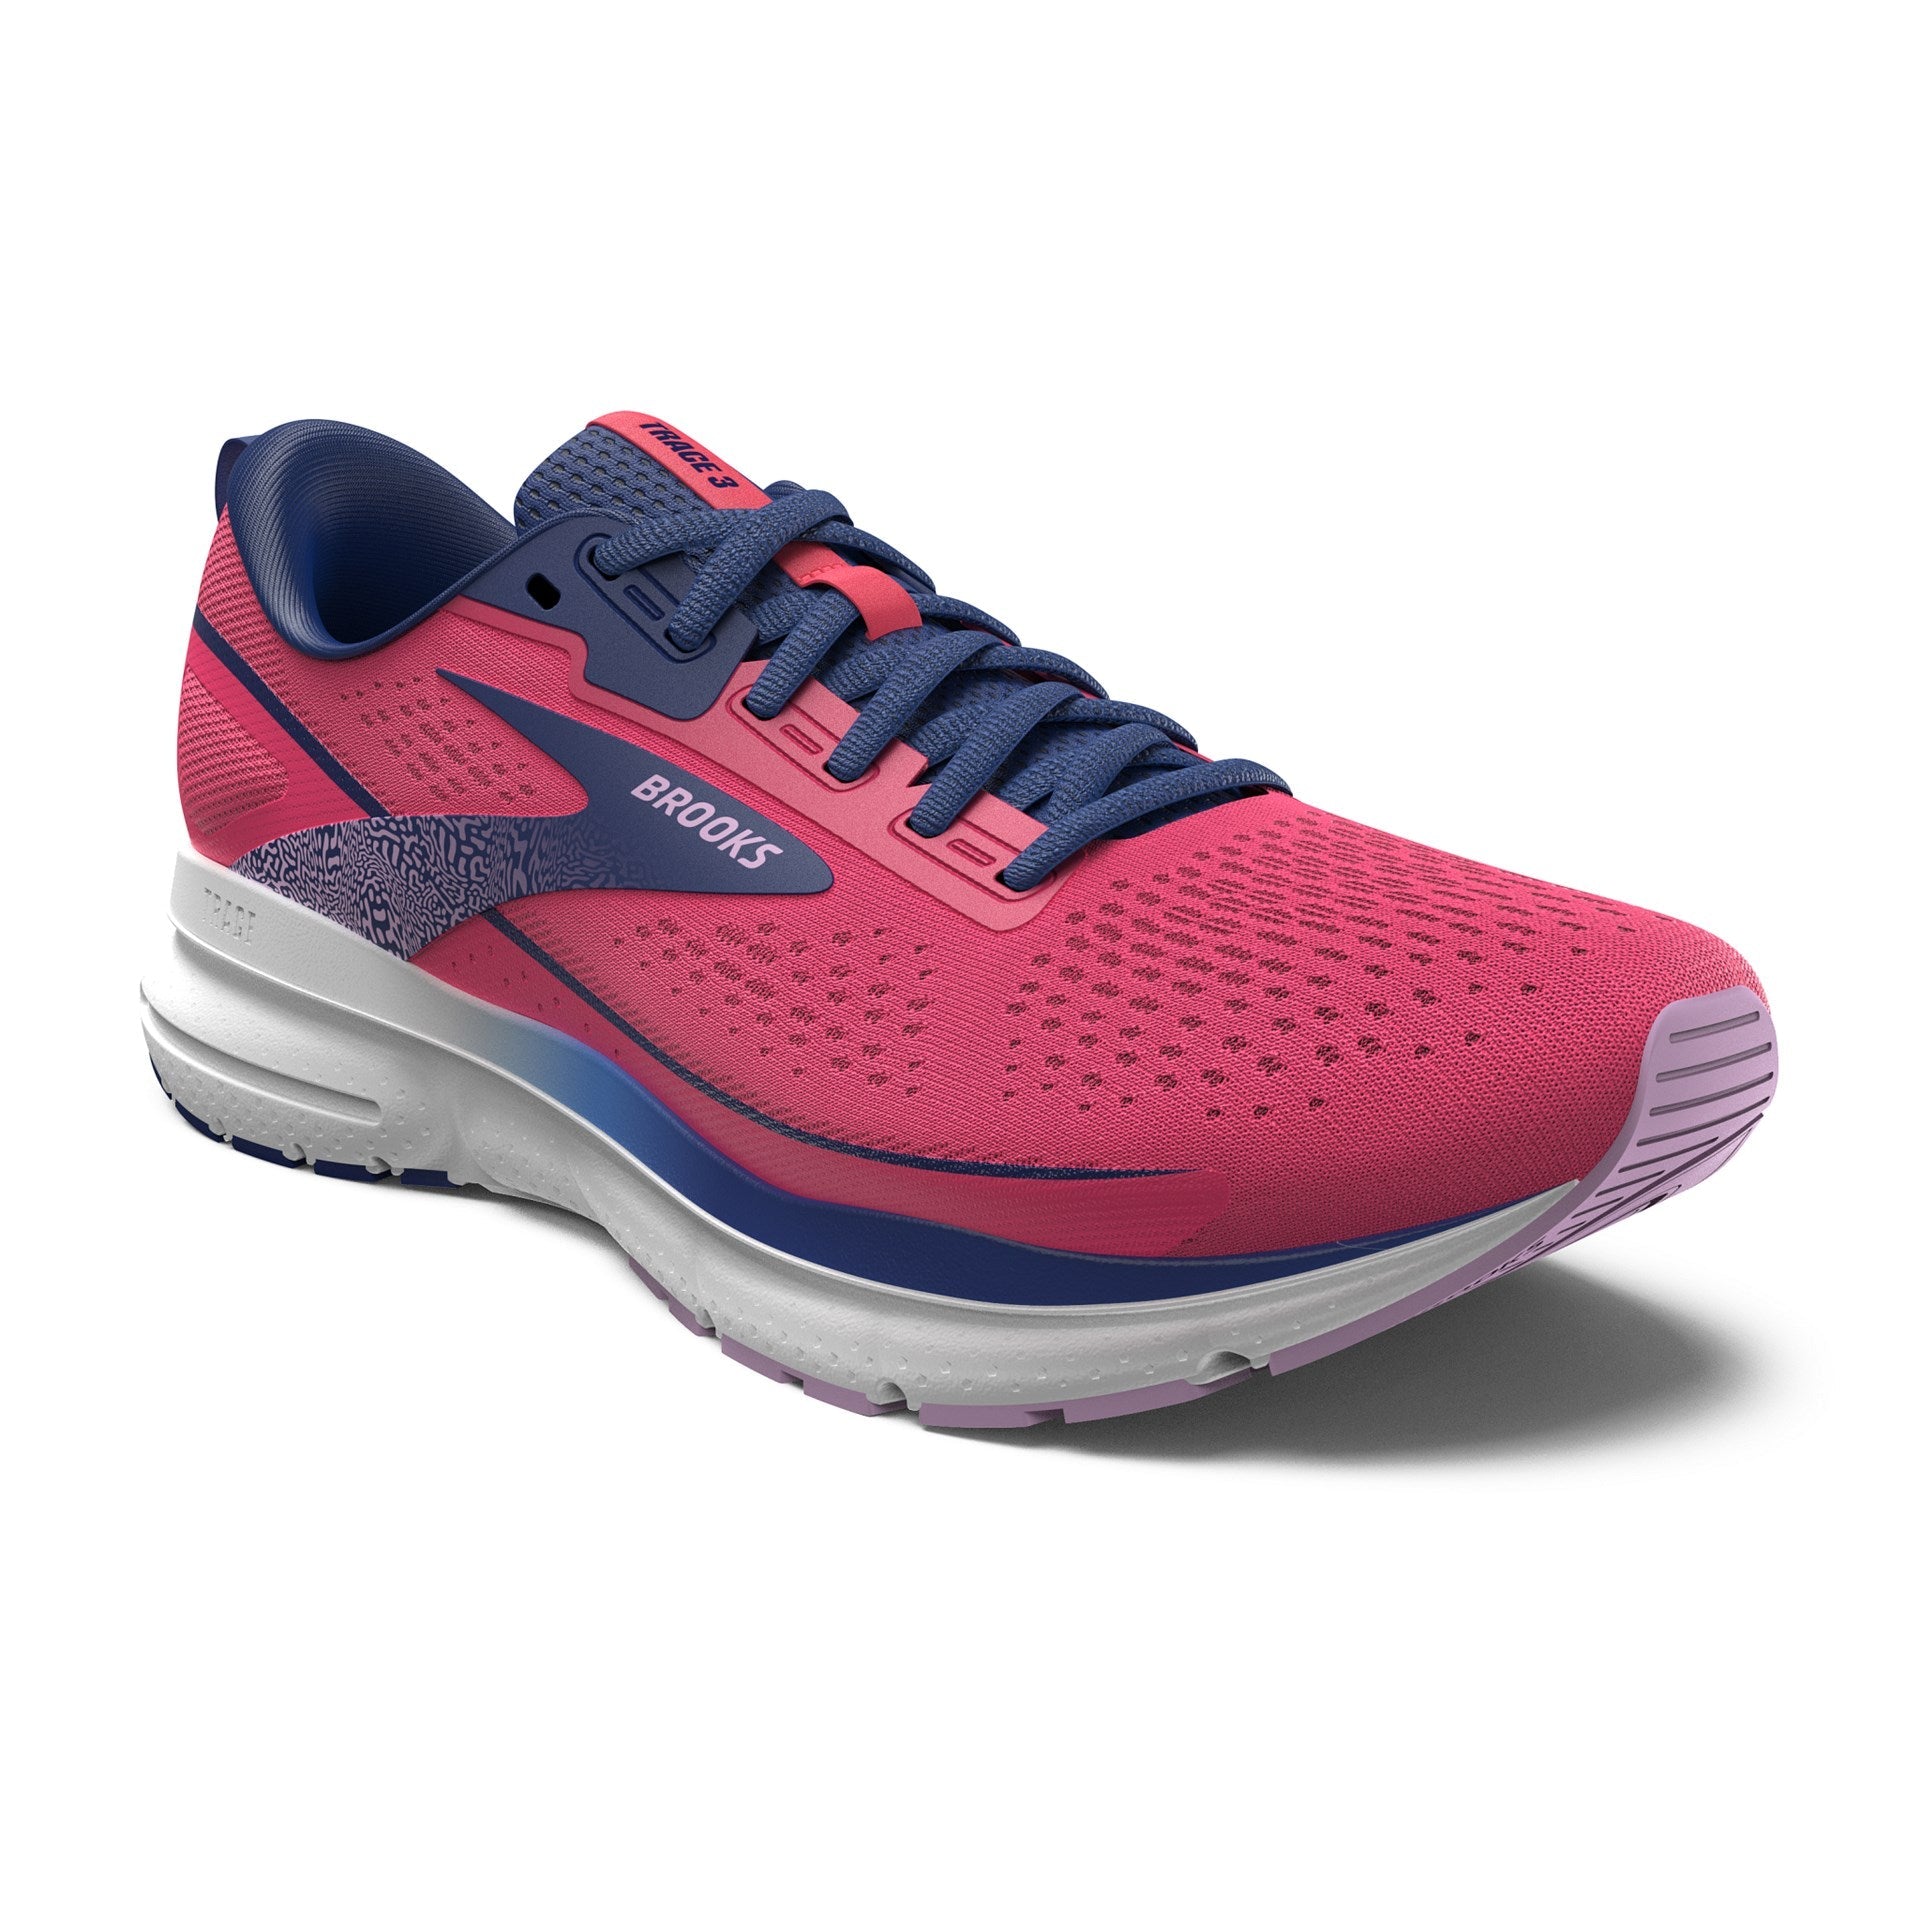 Brooks Trace 3 Running Shoes - Womens - Raspberry/Blue/Orchid